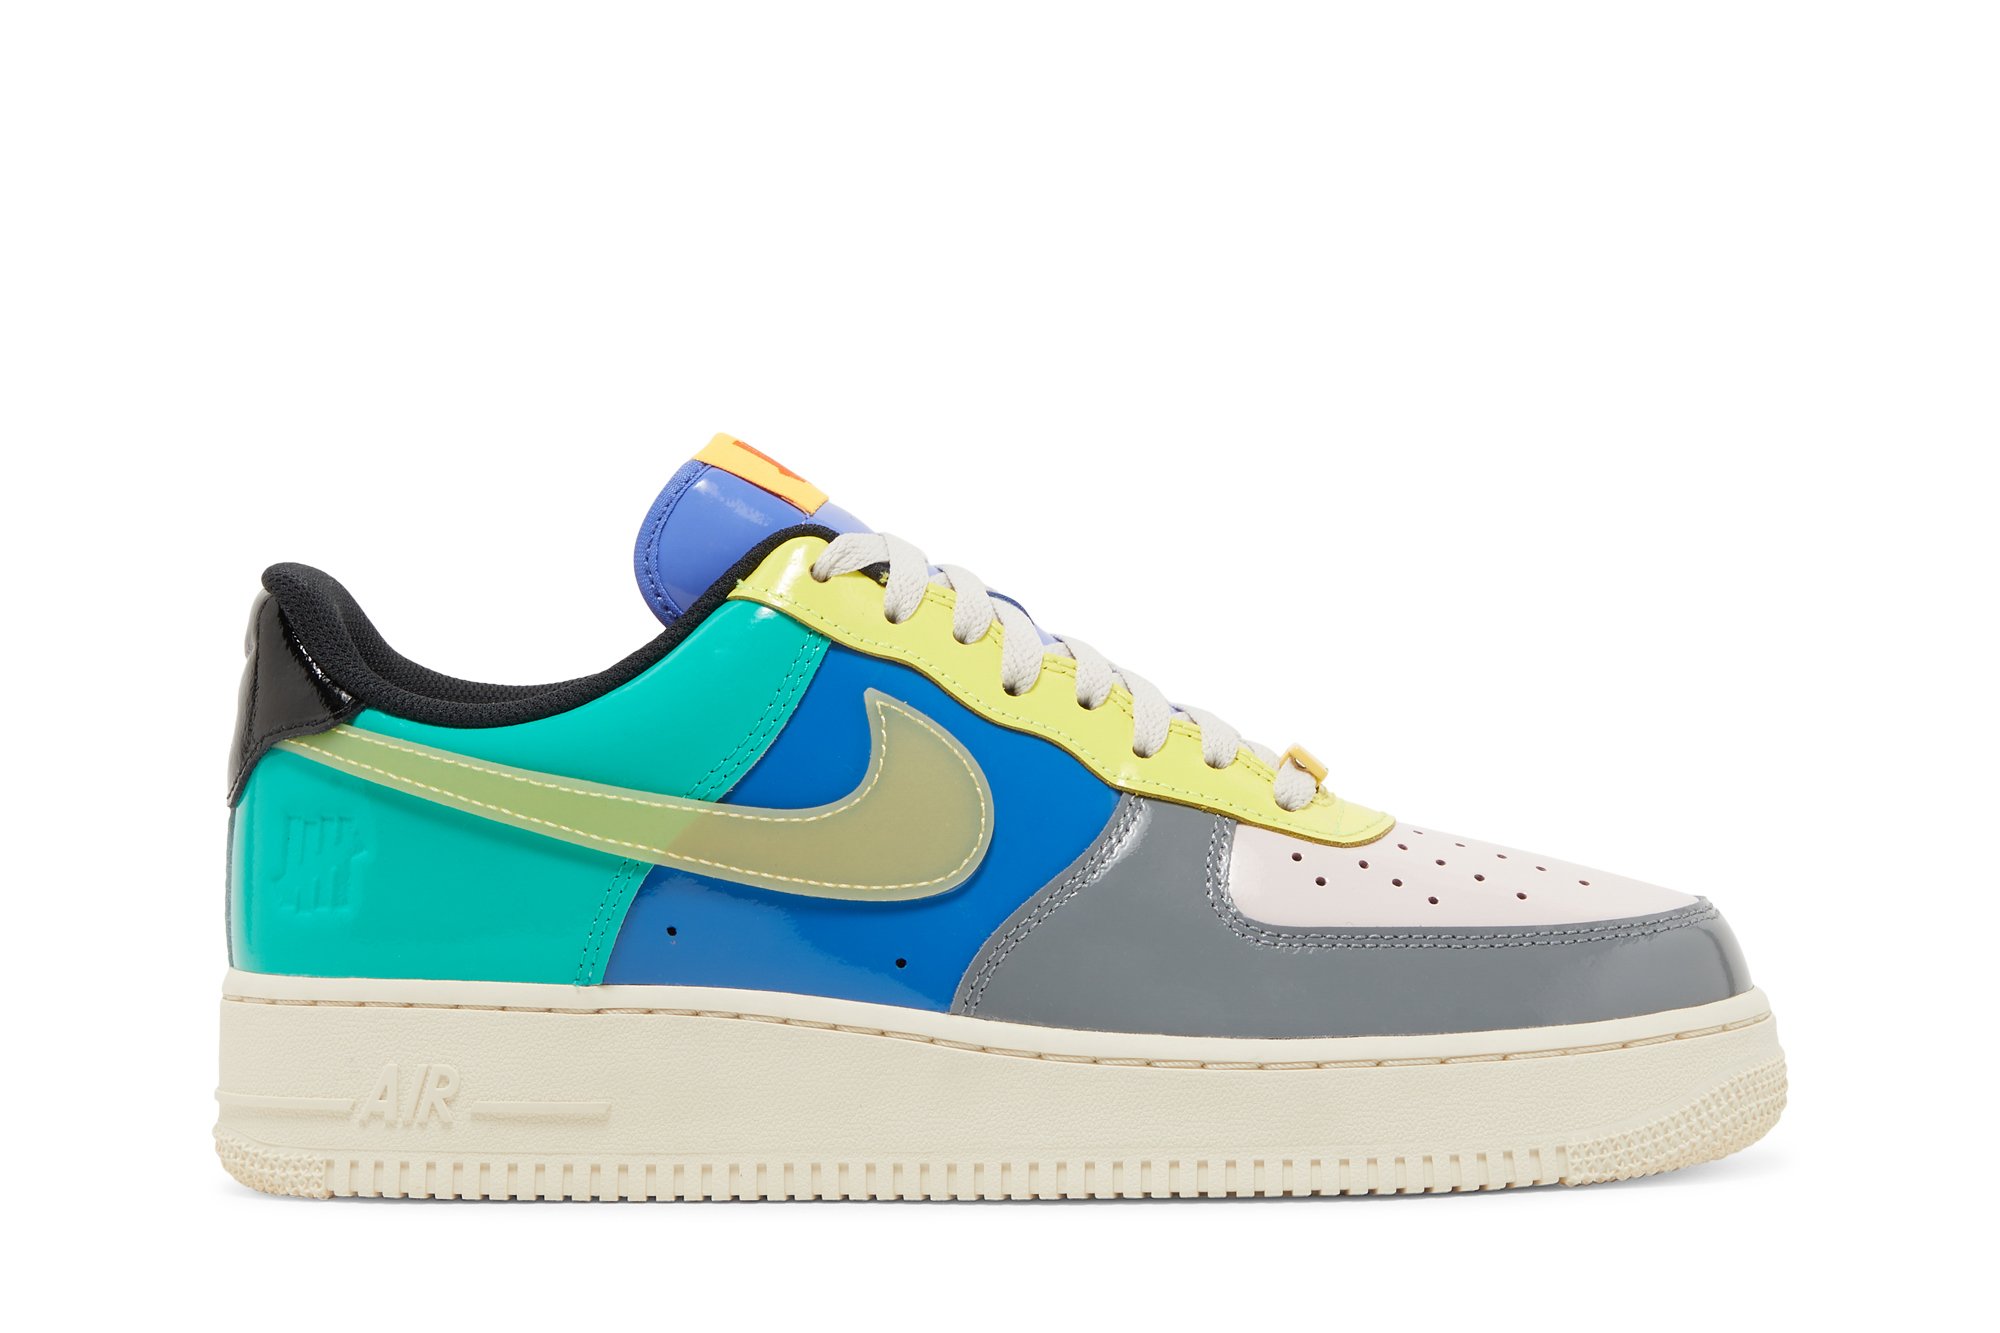 Buy Undefeated x Air Force 1 Low 'Community' - DV5255 001 - Multi